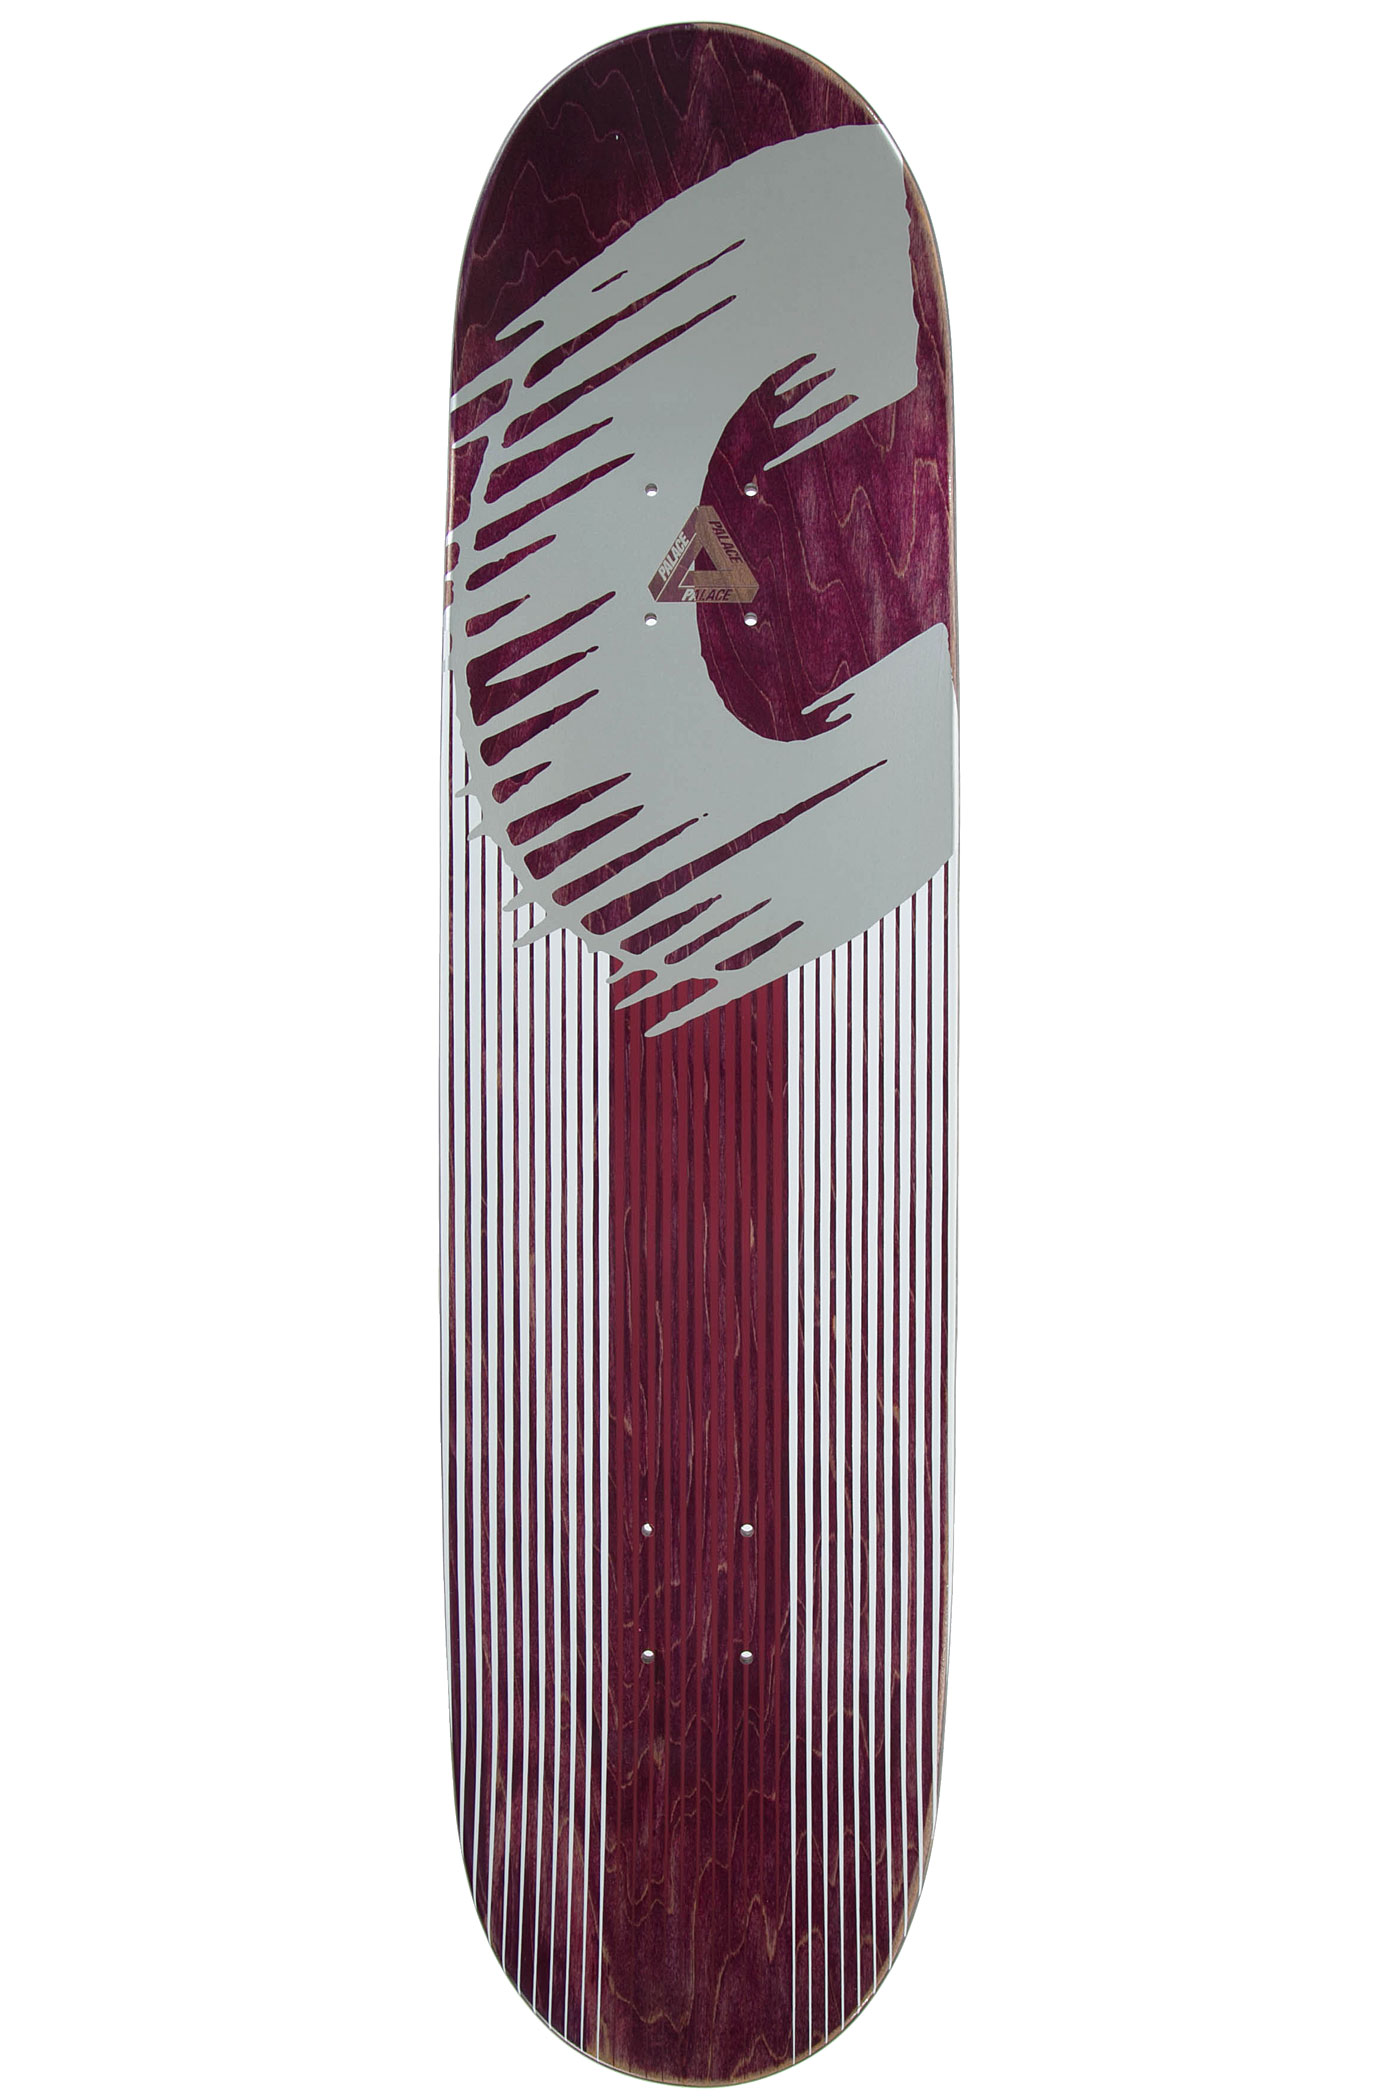 PALACE SKATEBOARDS Chewy Linear 8.375" Deck buy at skatedeluxe